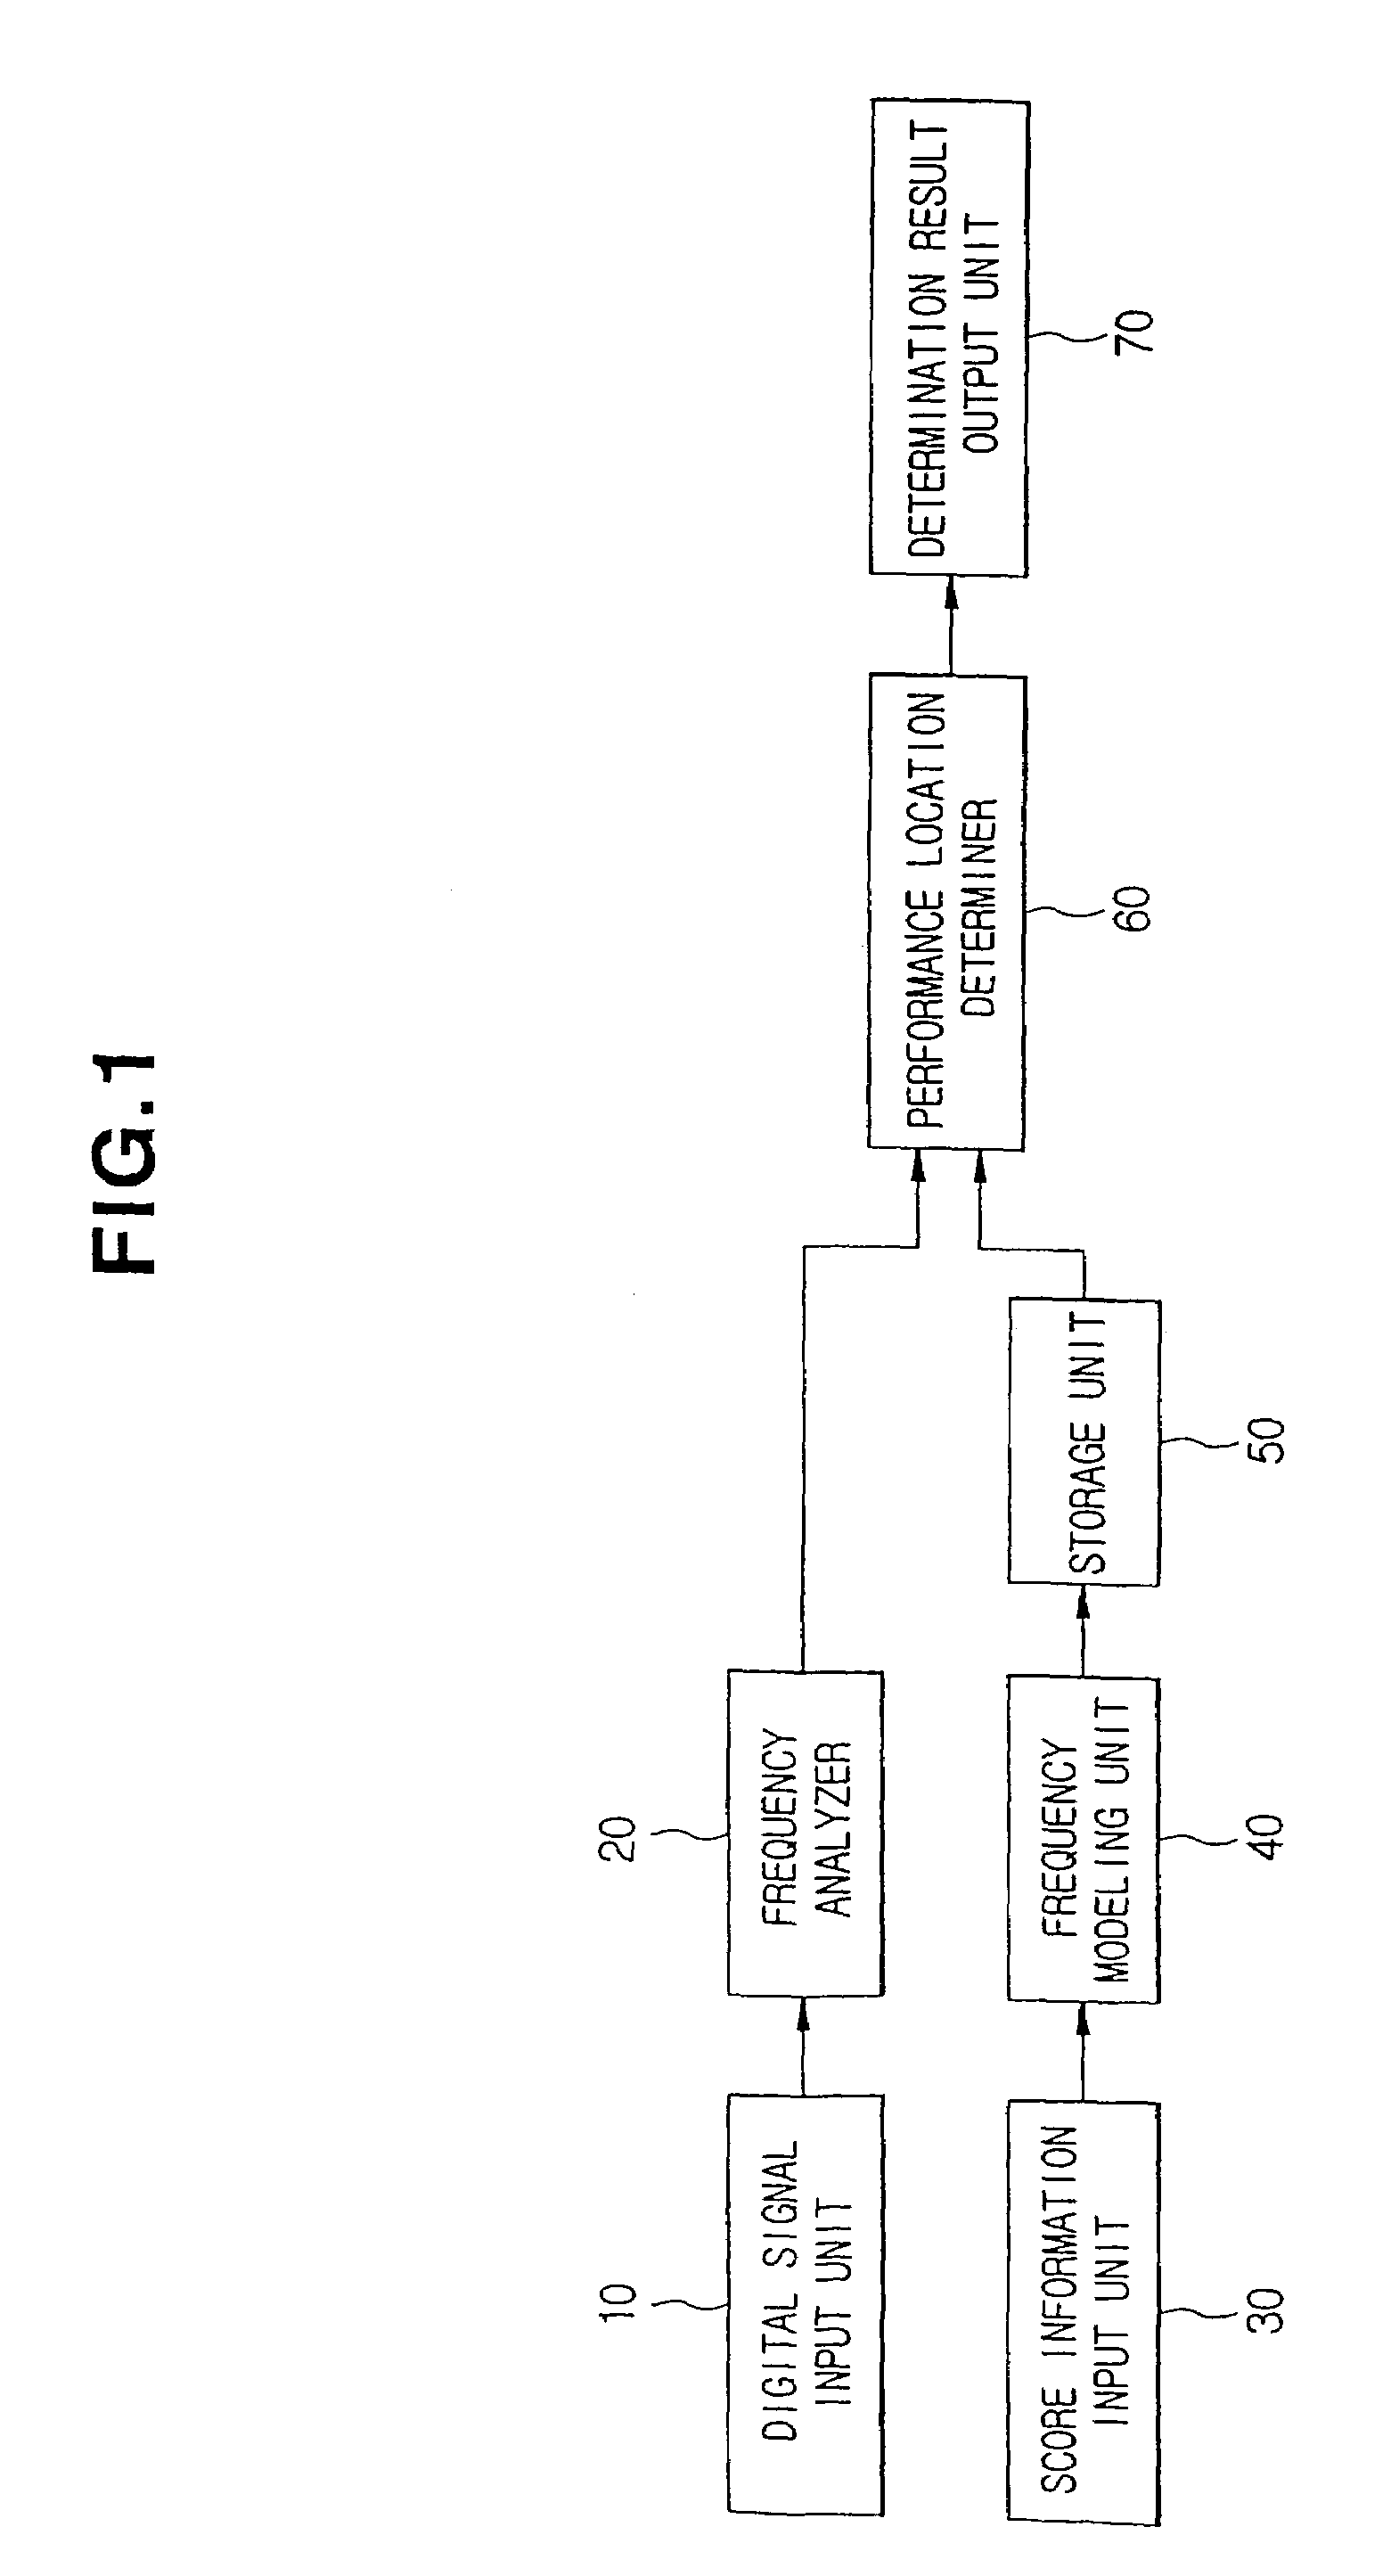 Method and apparatus for tracking musical score